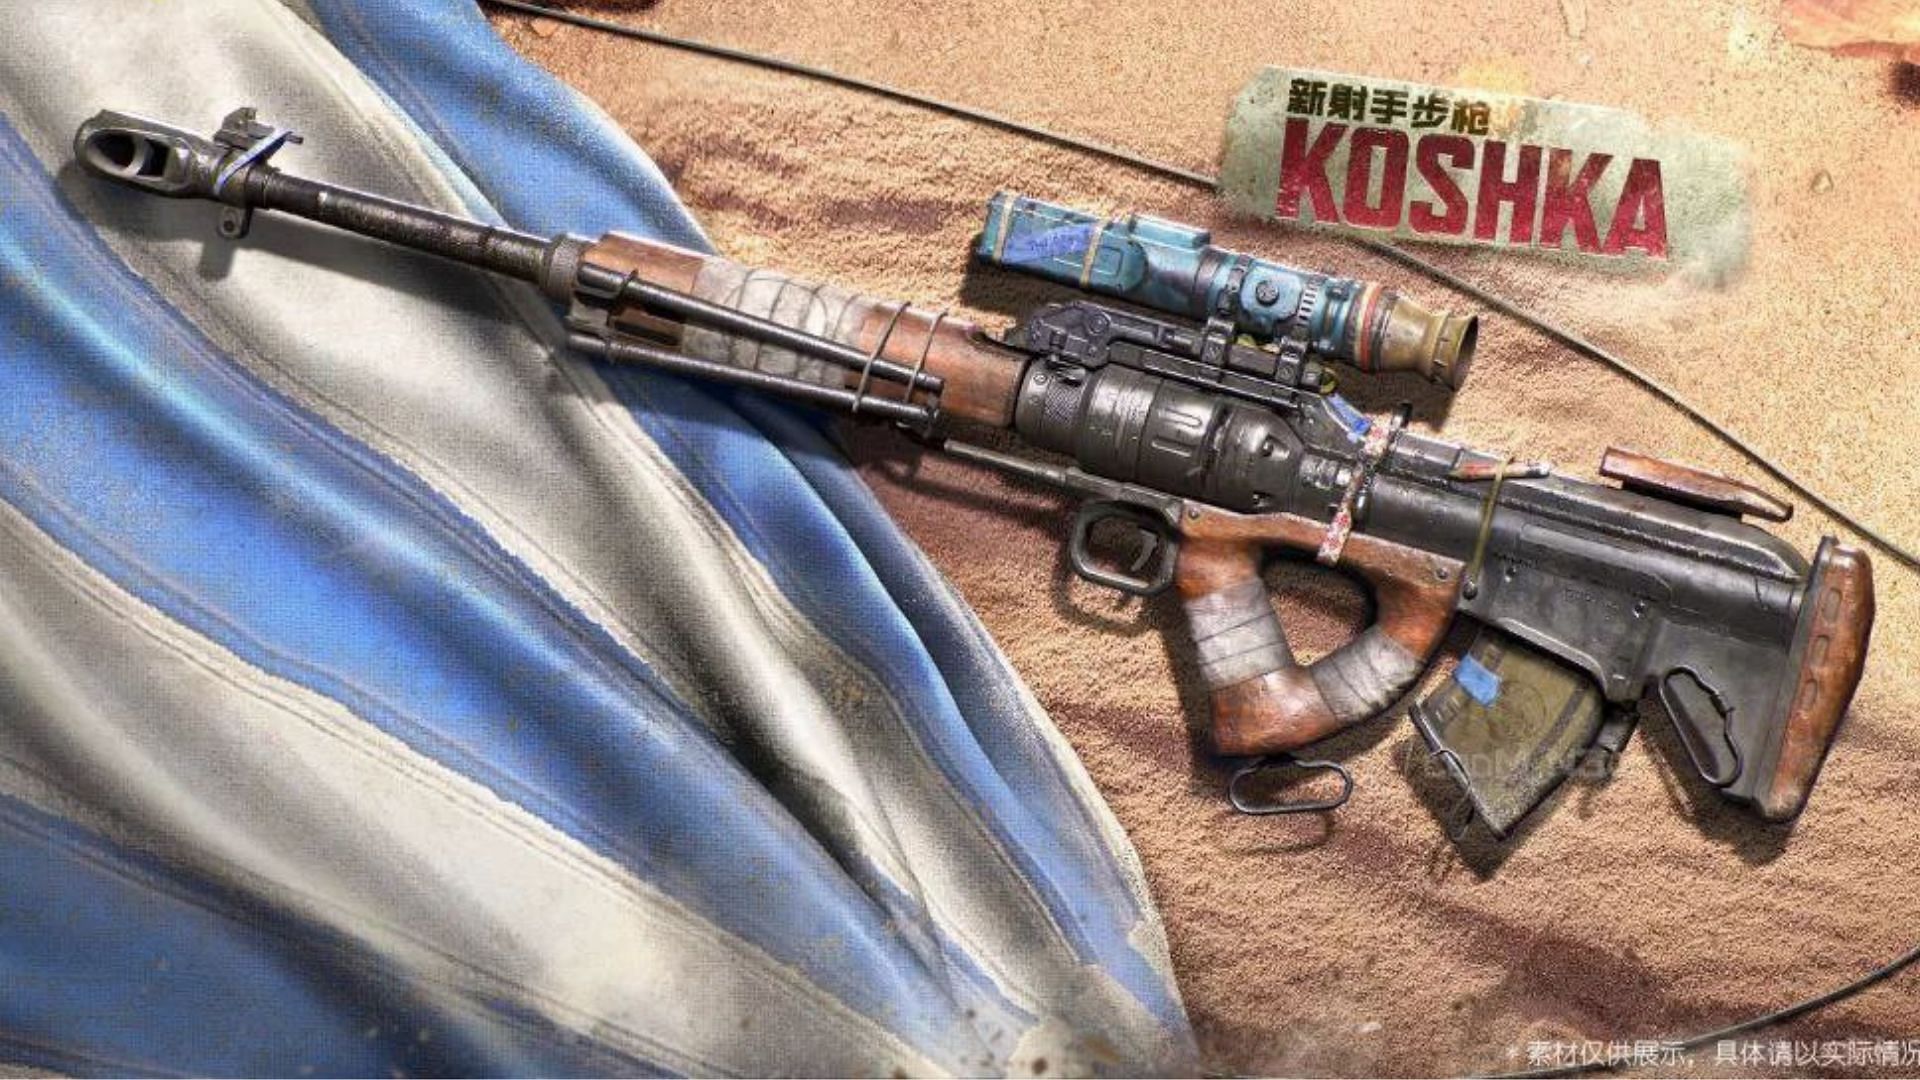 COD Mobile Season 4: Wild Dogs has released a new sniper rifle, Koshka, and it is quite aggressive on the battlefield (Image via Activision)